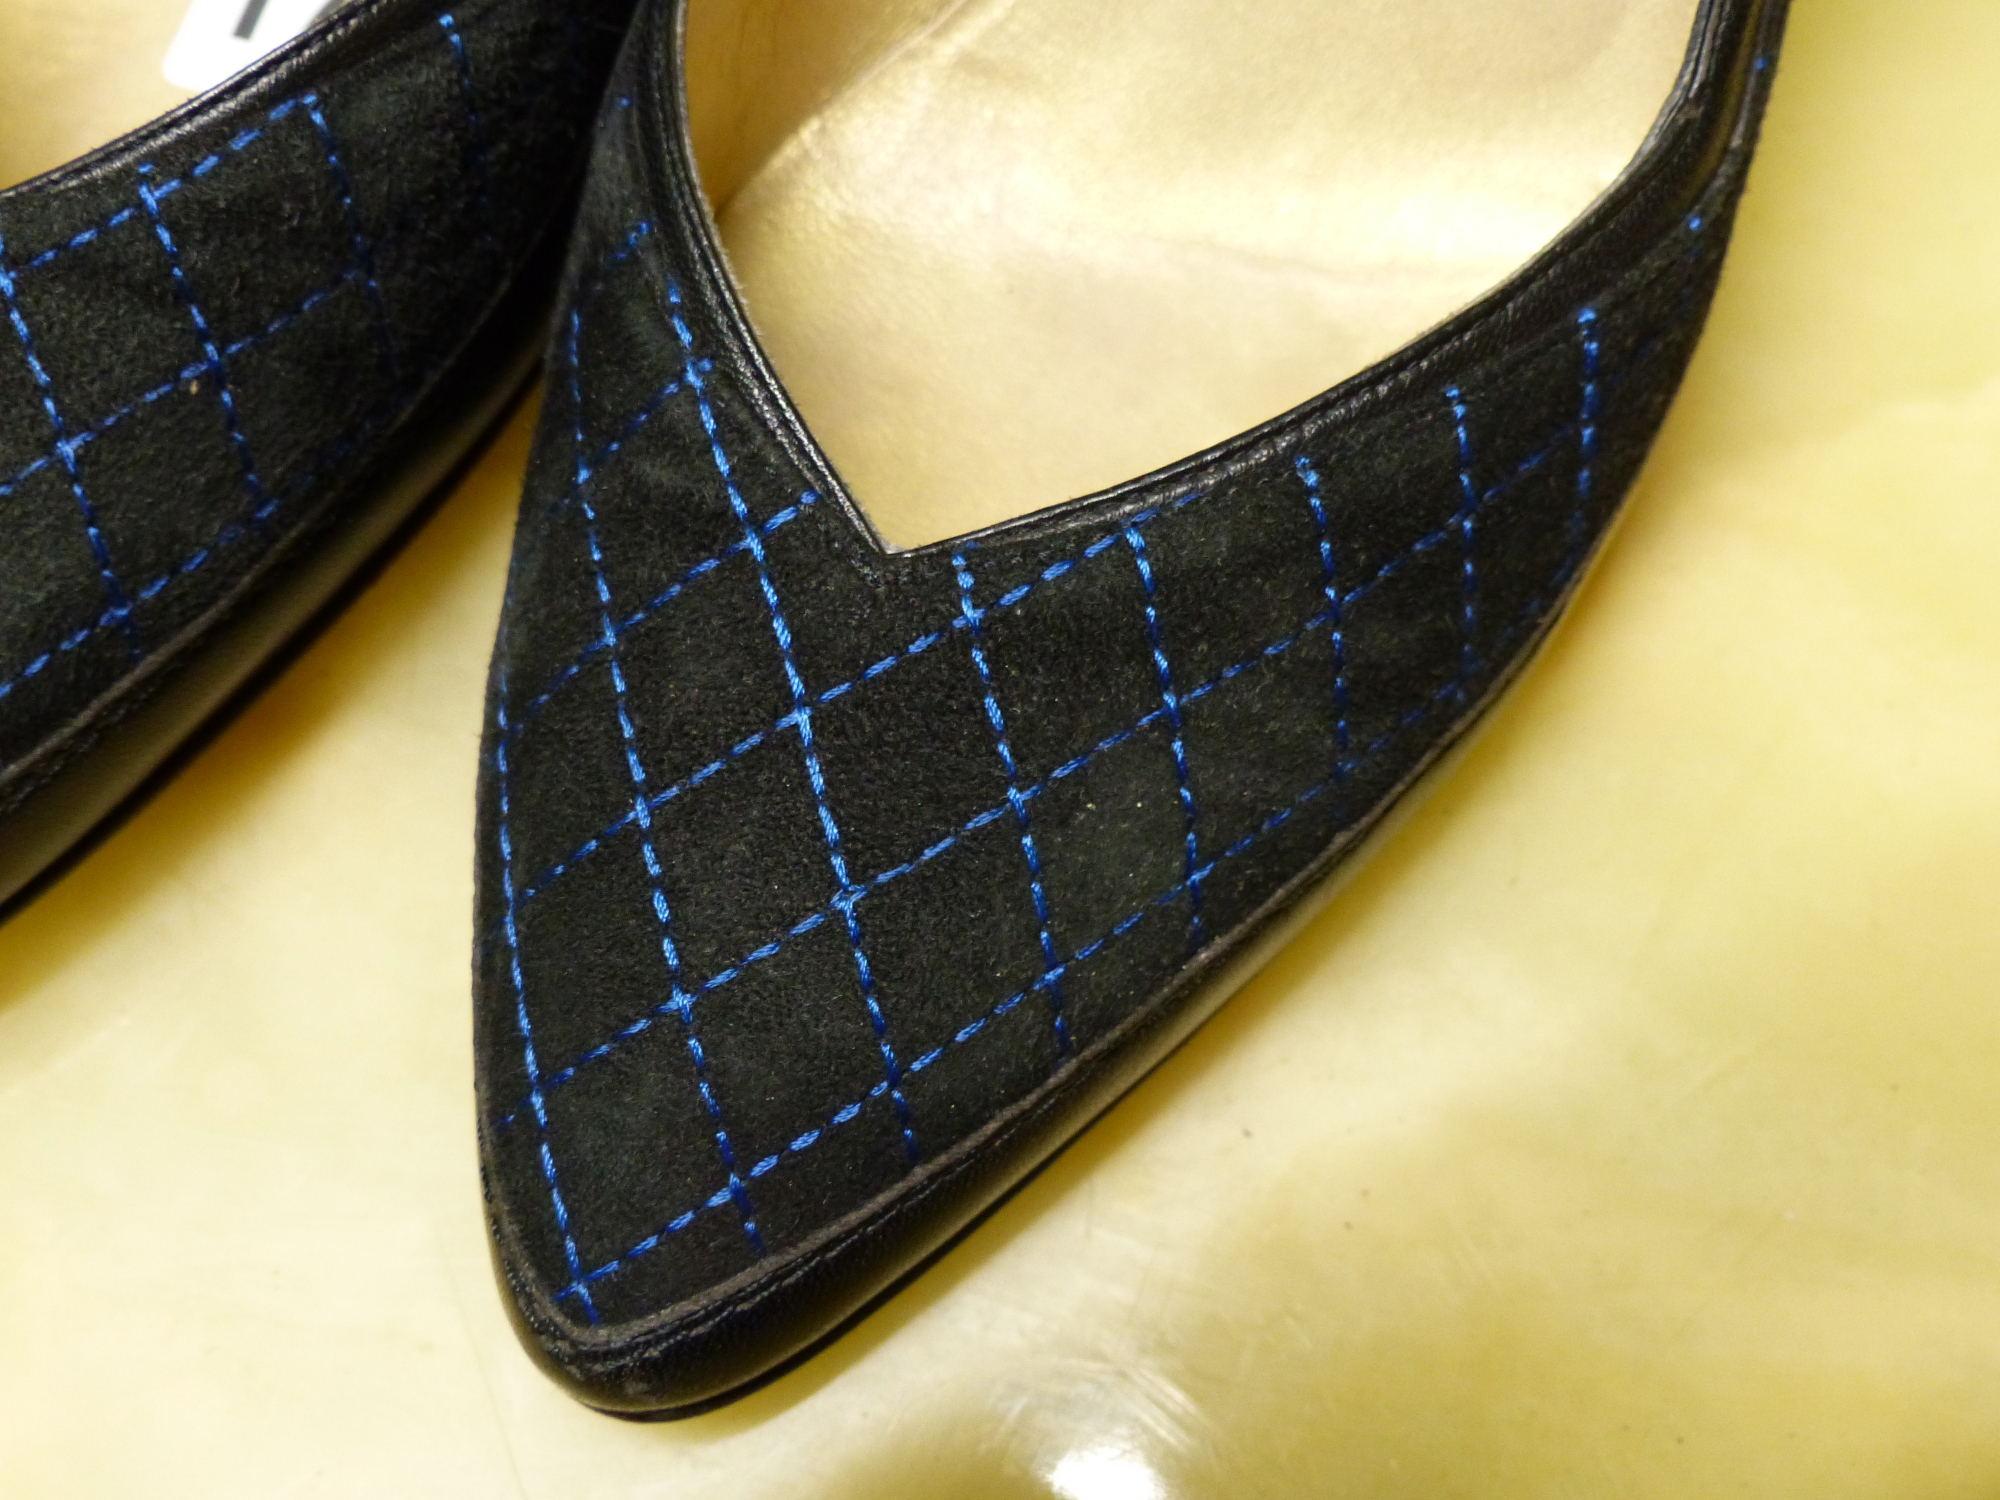 SHOES. GIANNI VERSACE ITALIAN BLACK WITH NAVY STITCH HEELS. EURO SIZE 39. HEEL HEIGHT 8cm. - Image 7 of 8